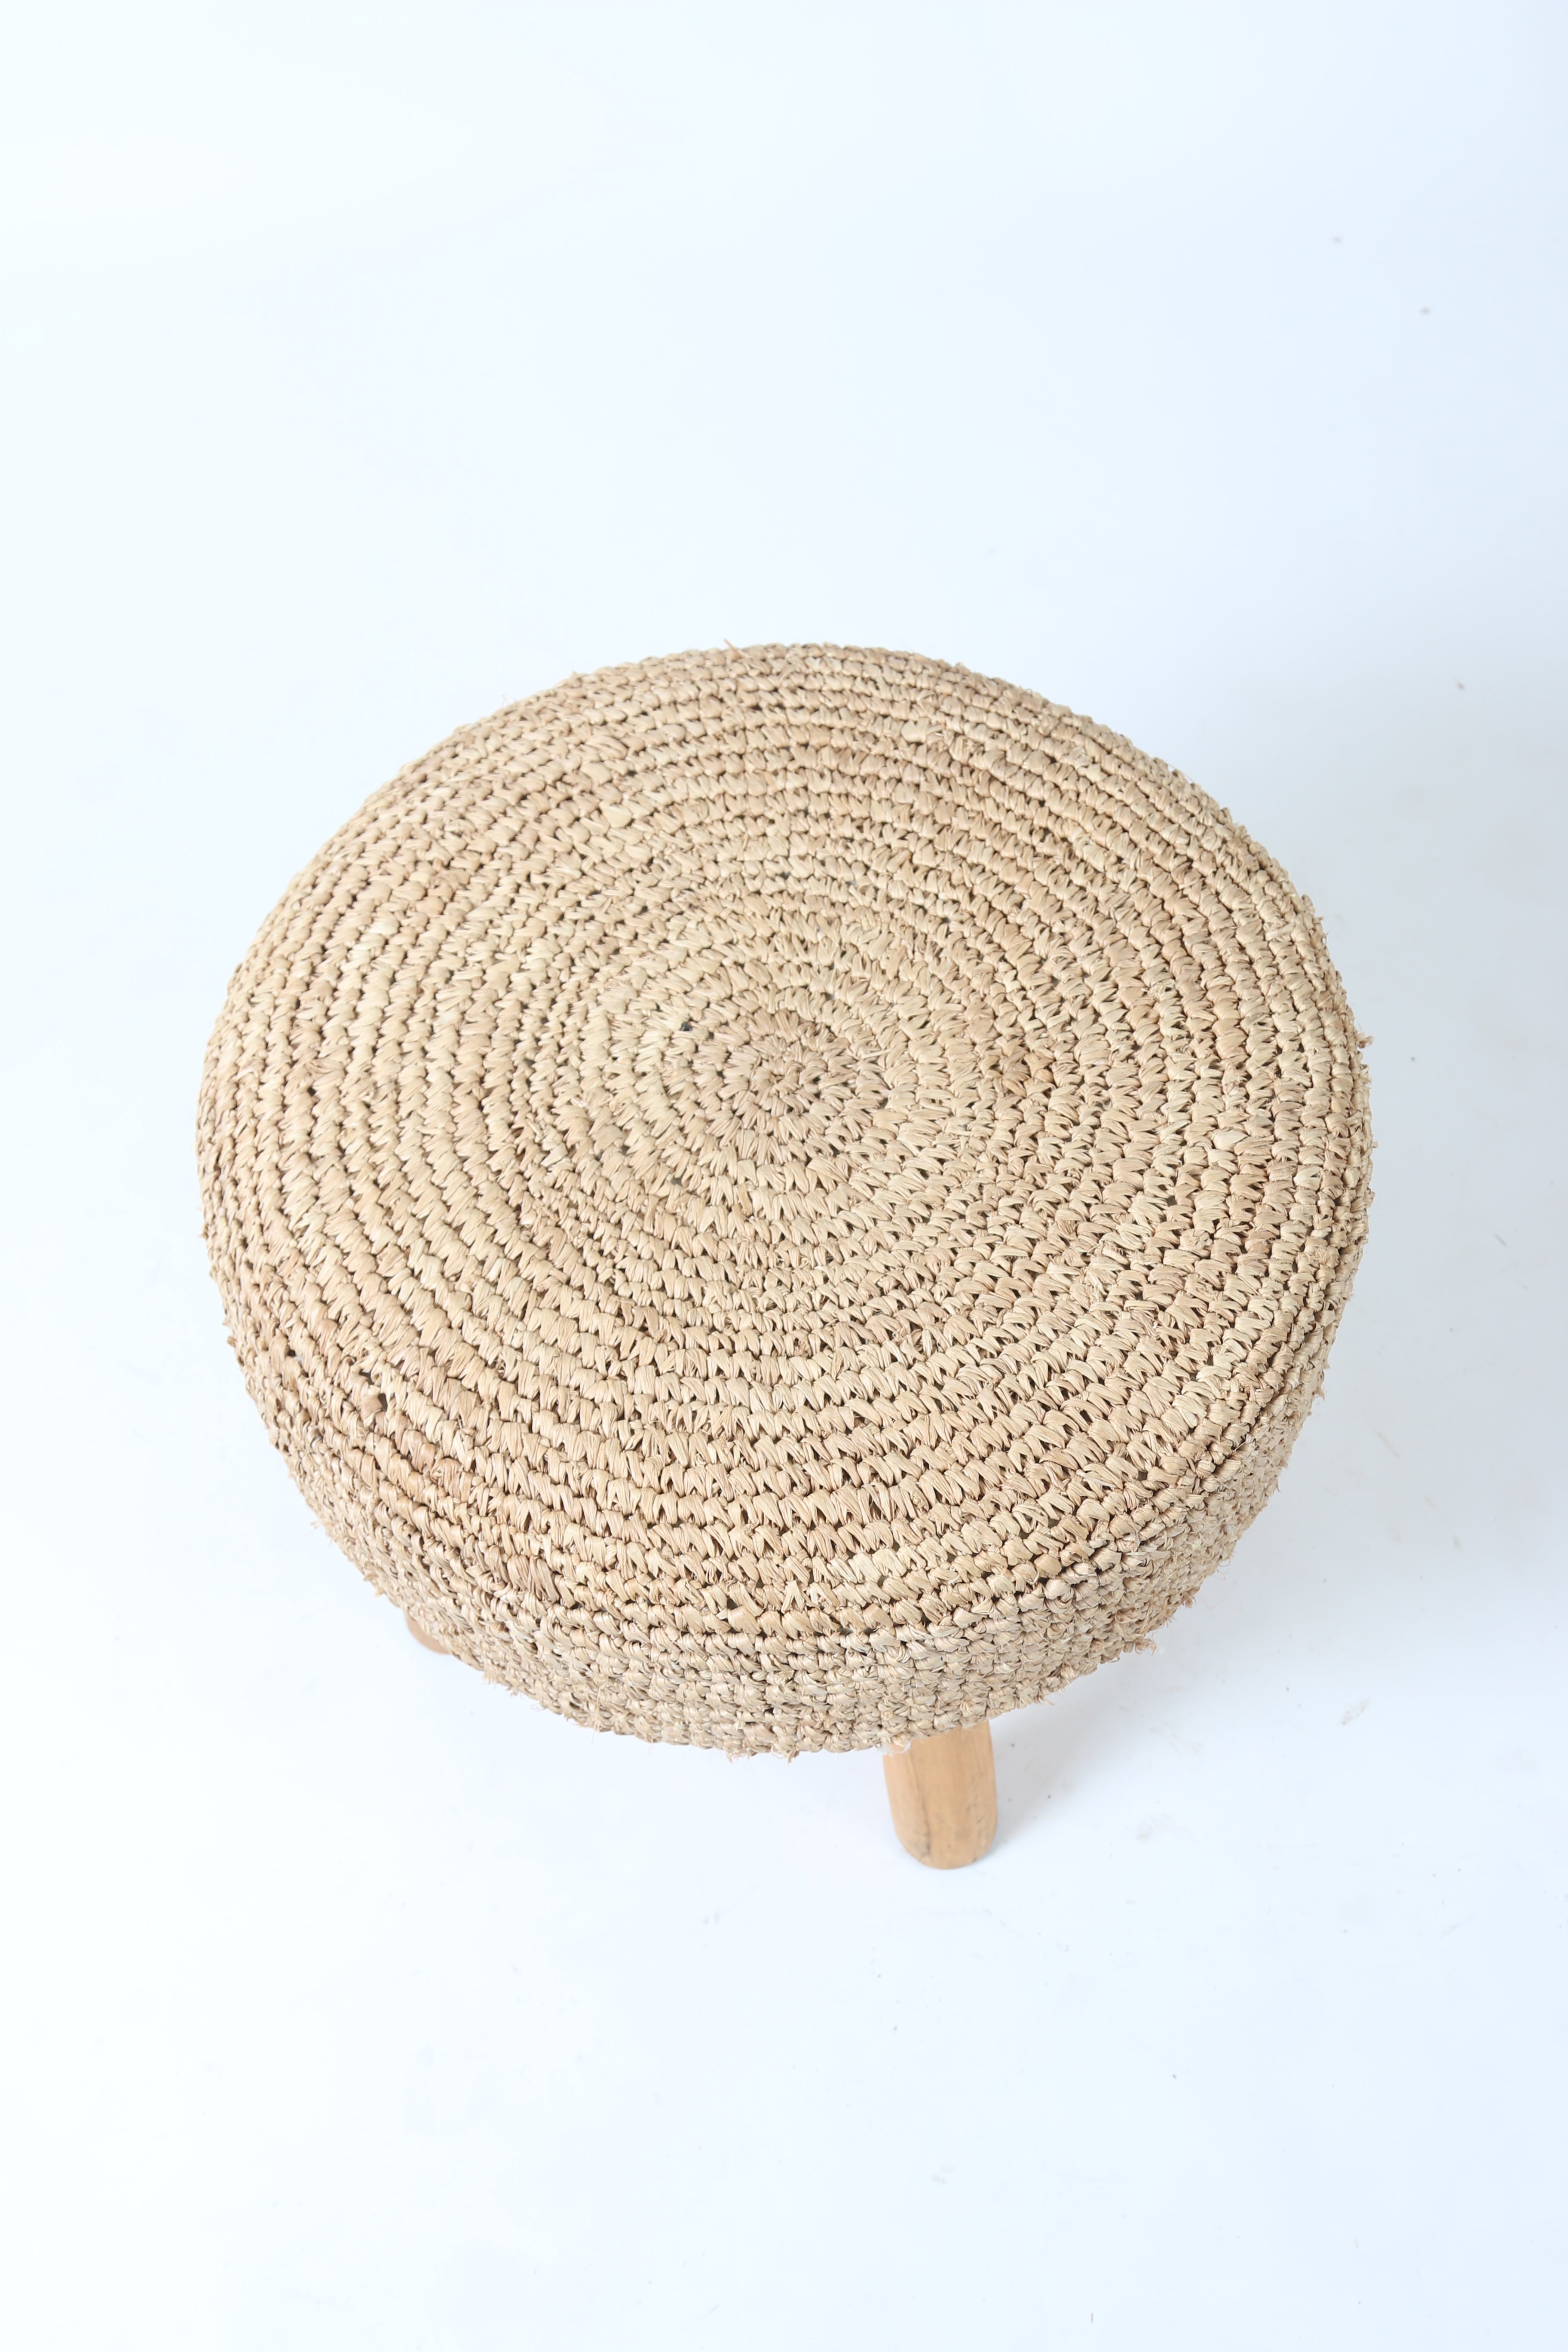 Padded Sea Grass Stool with Four Wooden Teak Legs